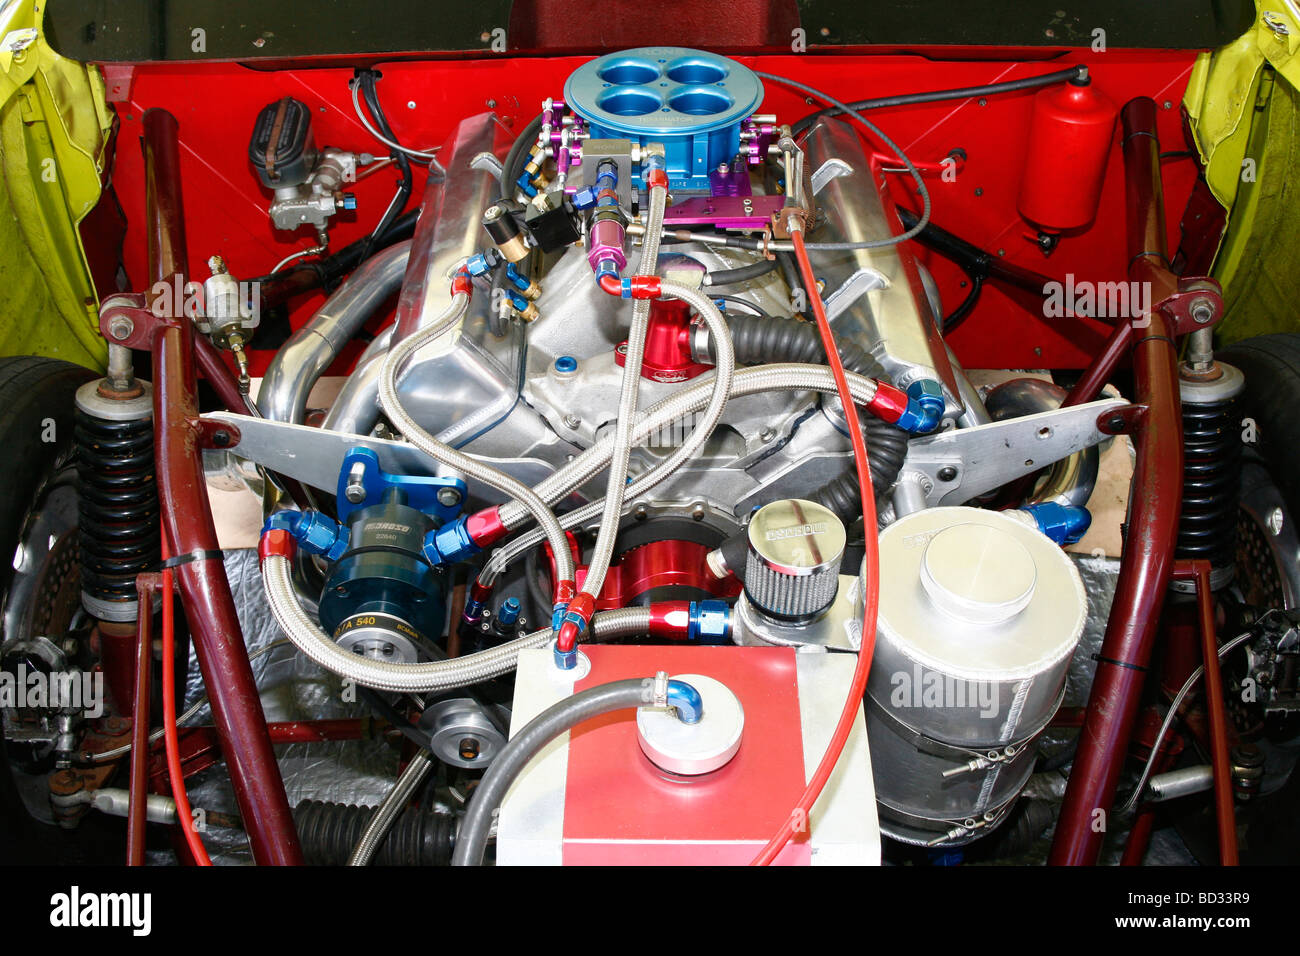 Heavily modified Chevrolet V8 engine in a drag racing car Stock Photo